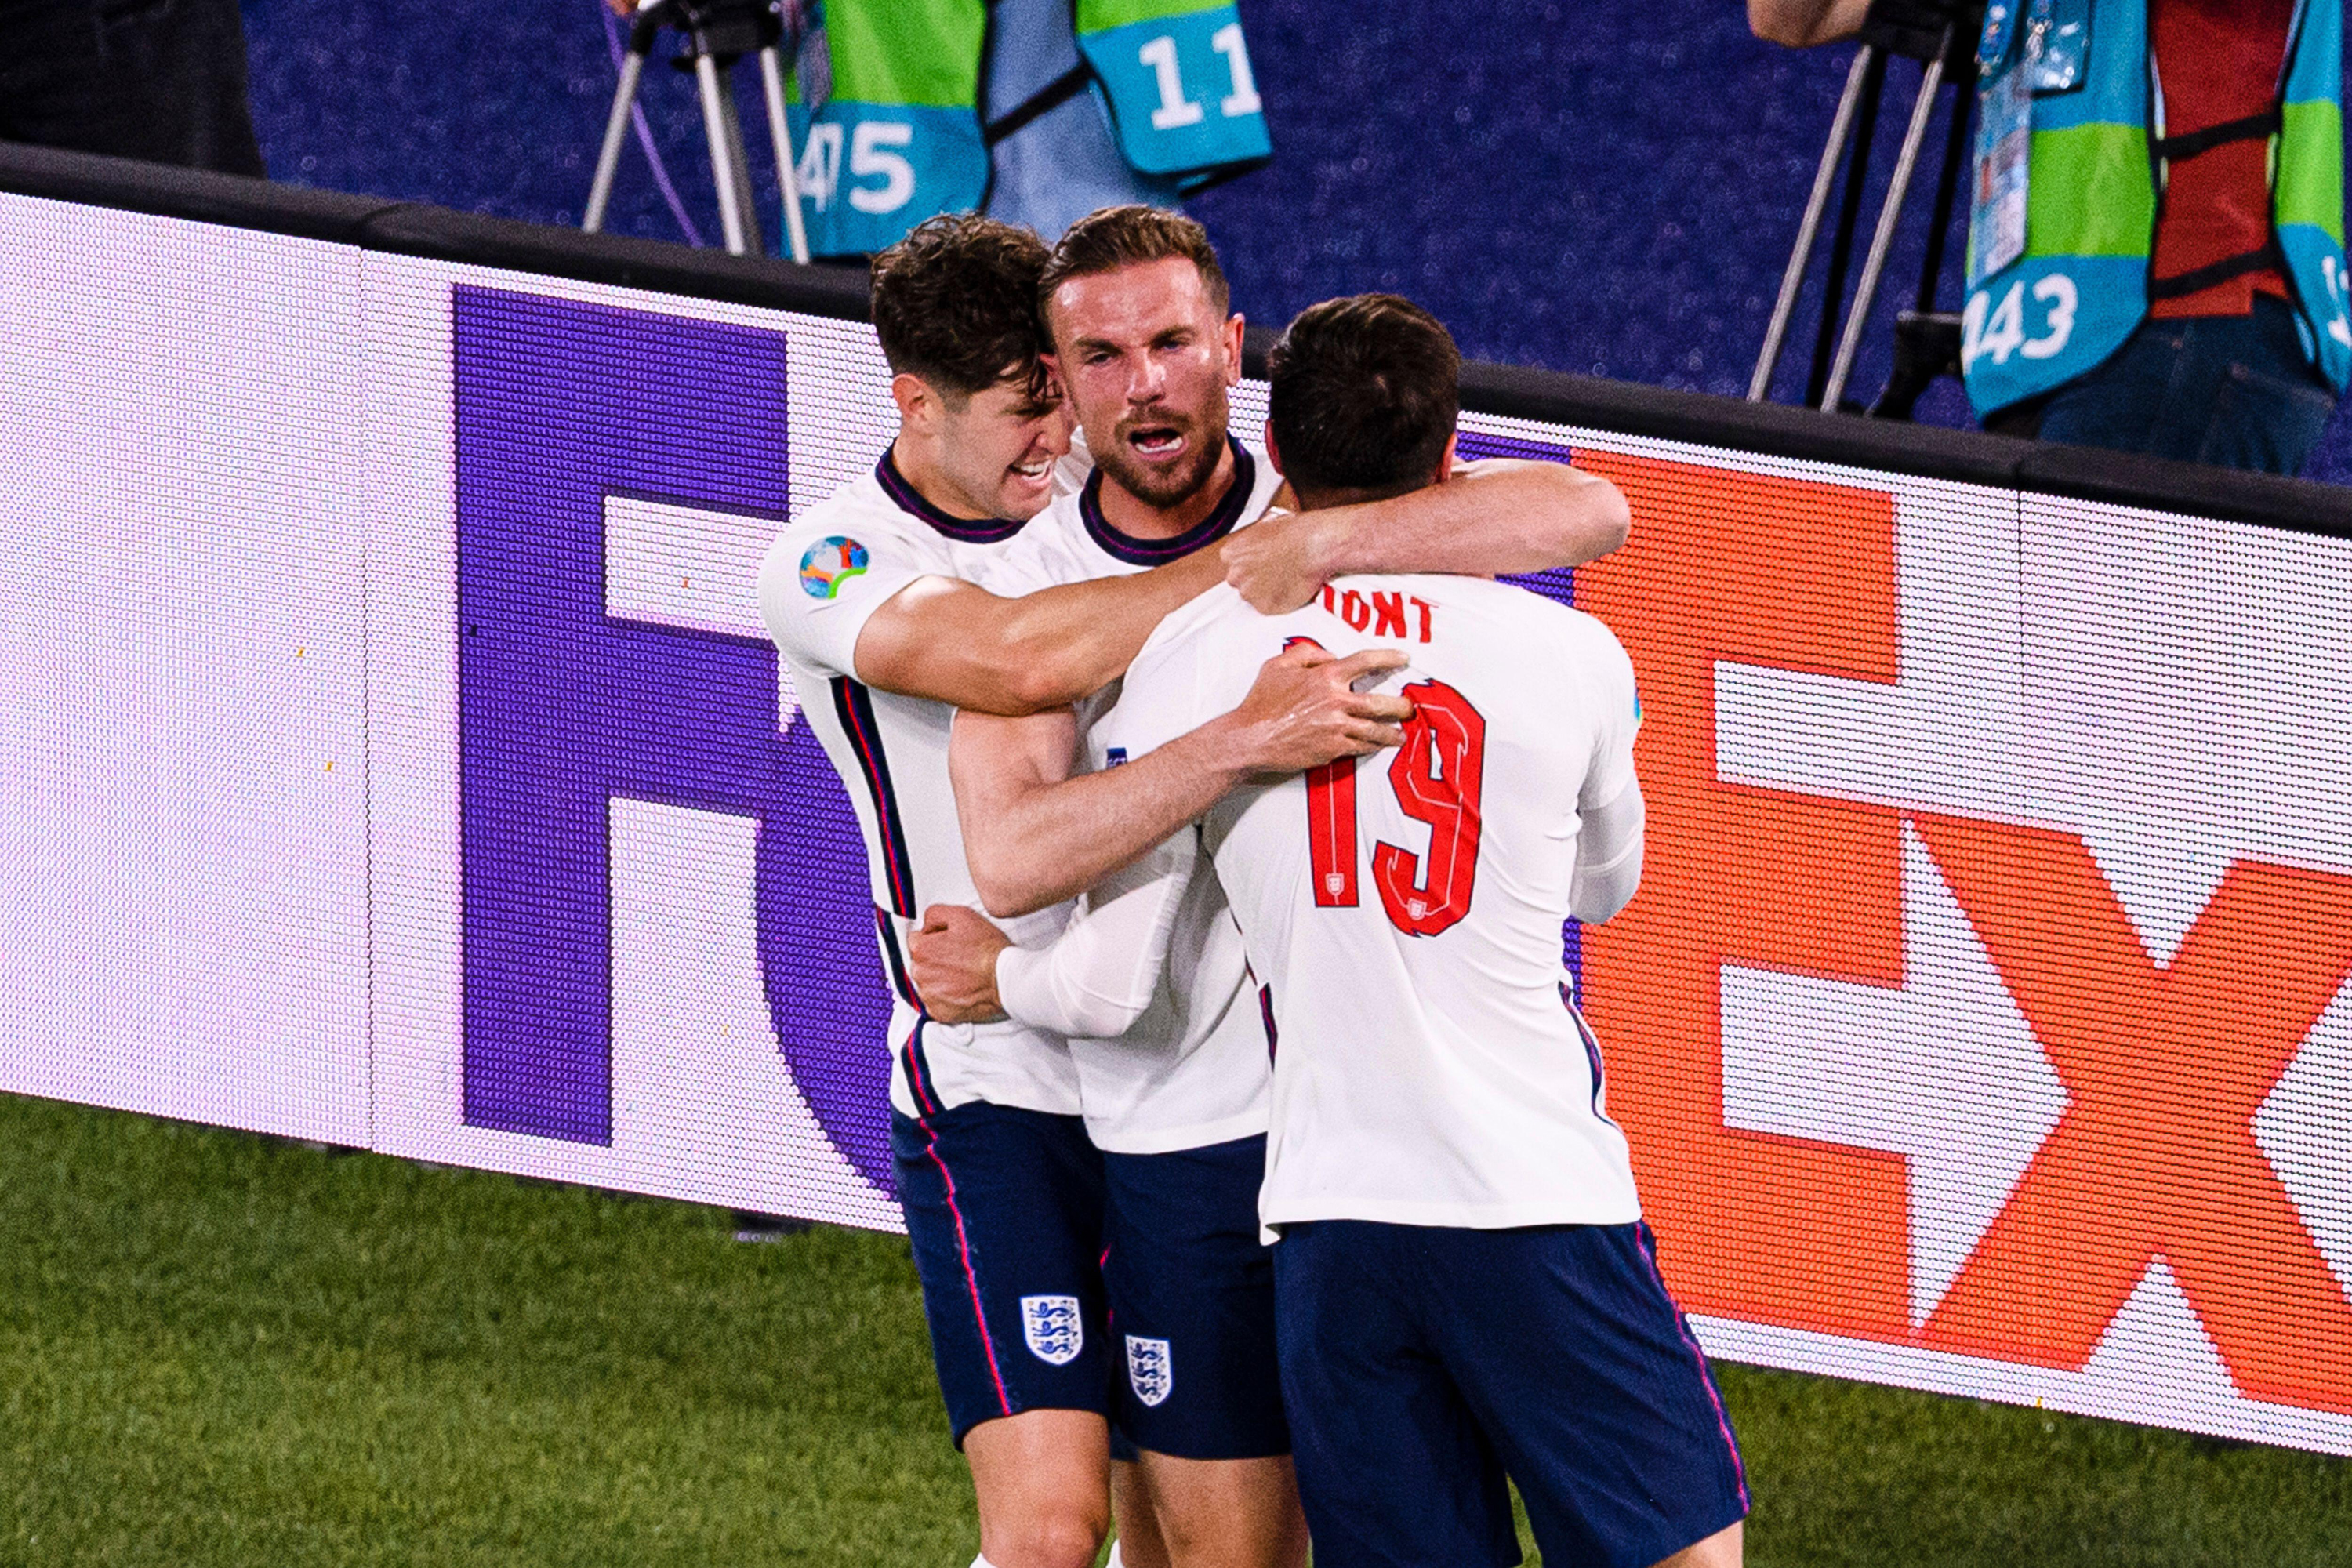 Henderson celebrating with team mates